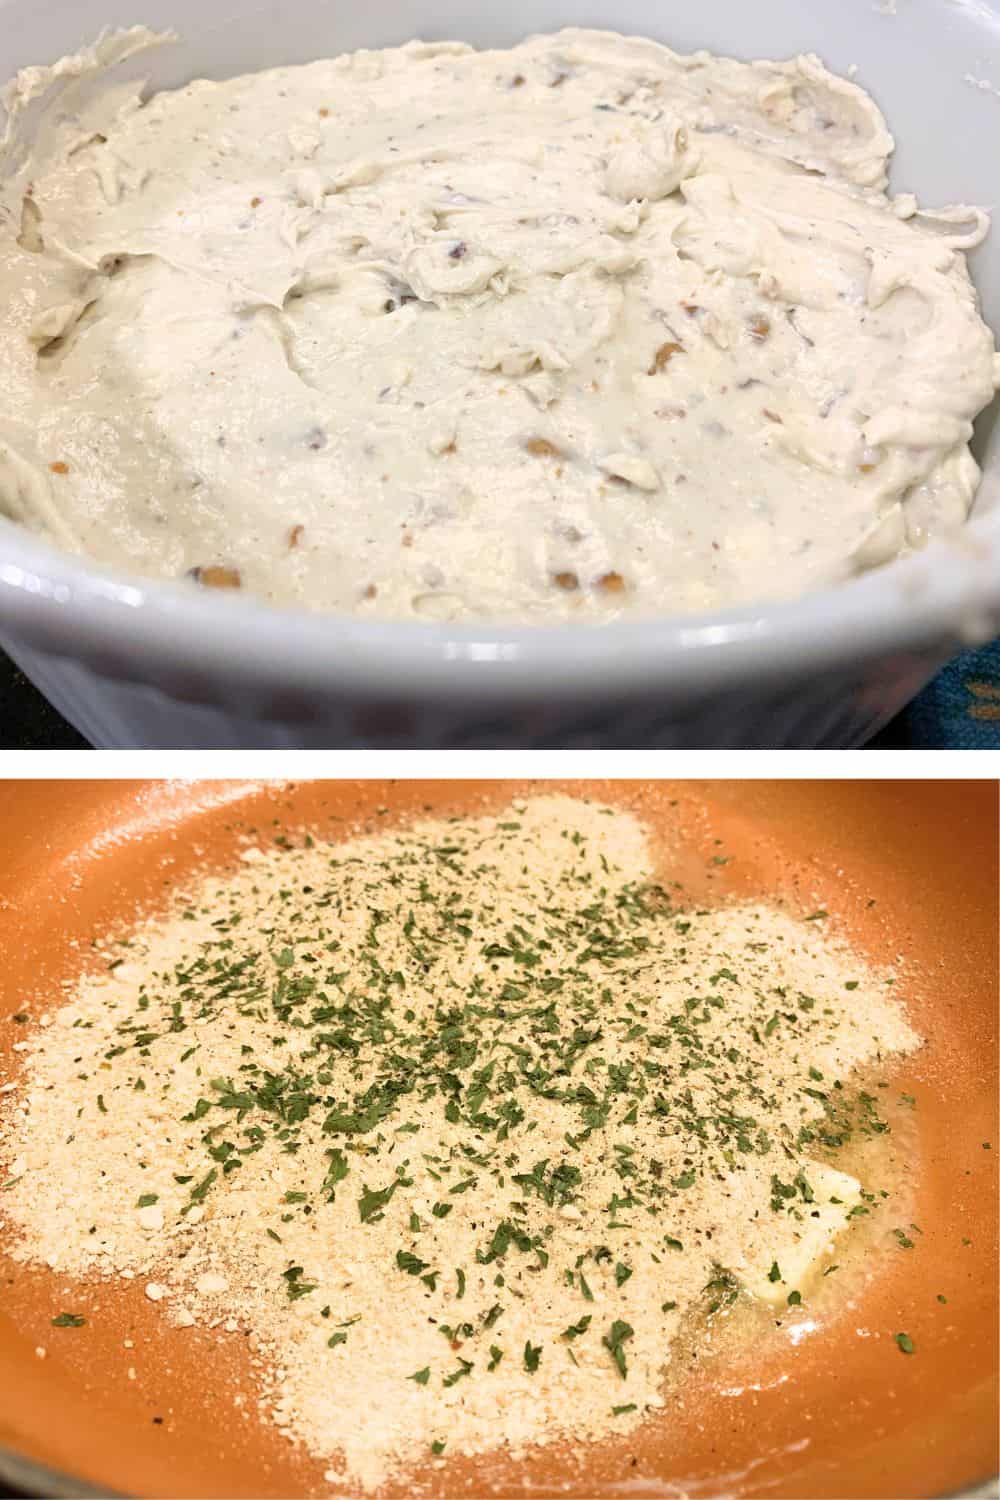 Warm Blue Cheese Spread Recipe With Bread Crumbs Topping